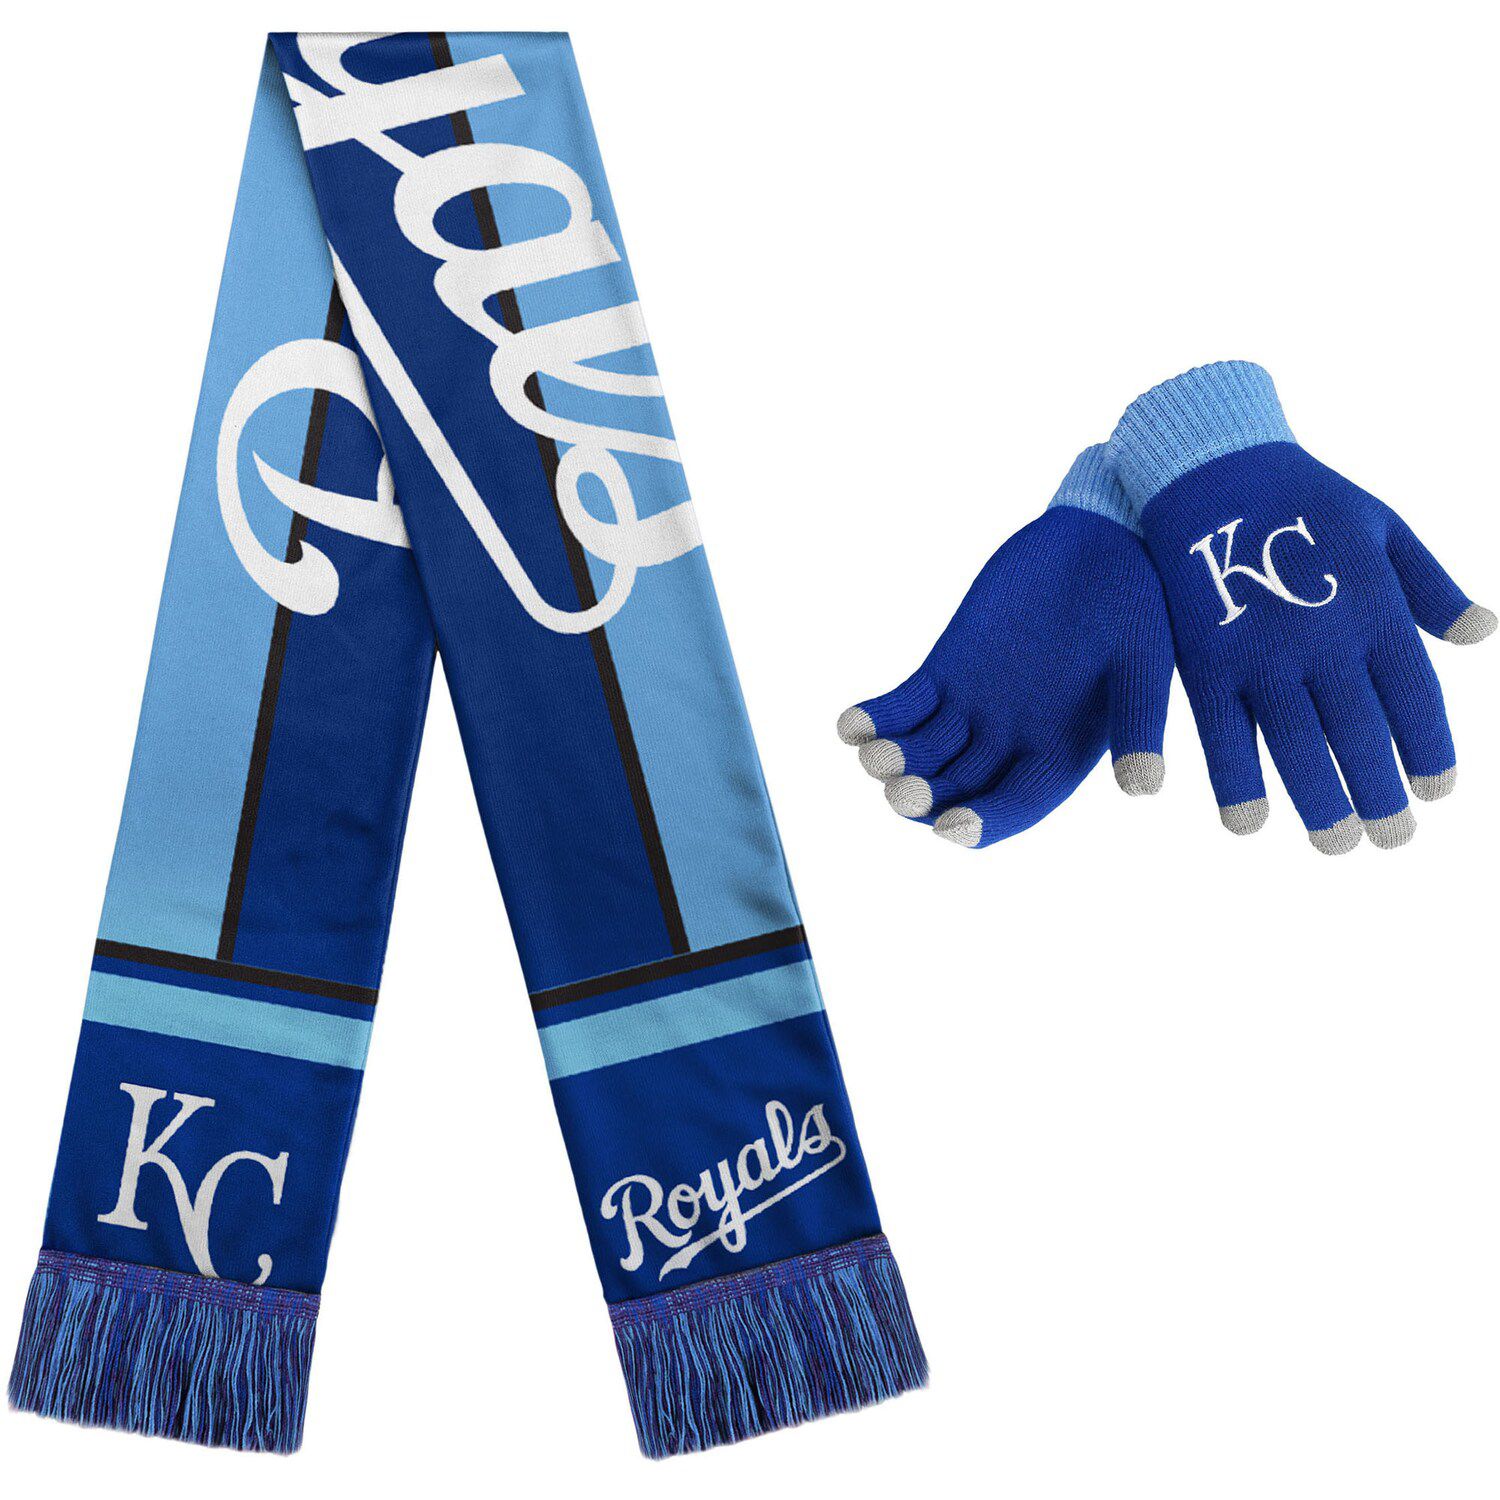 Image for Unbranded Women's Kansas City Royals Glove and Scarf Set at Kohl's.